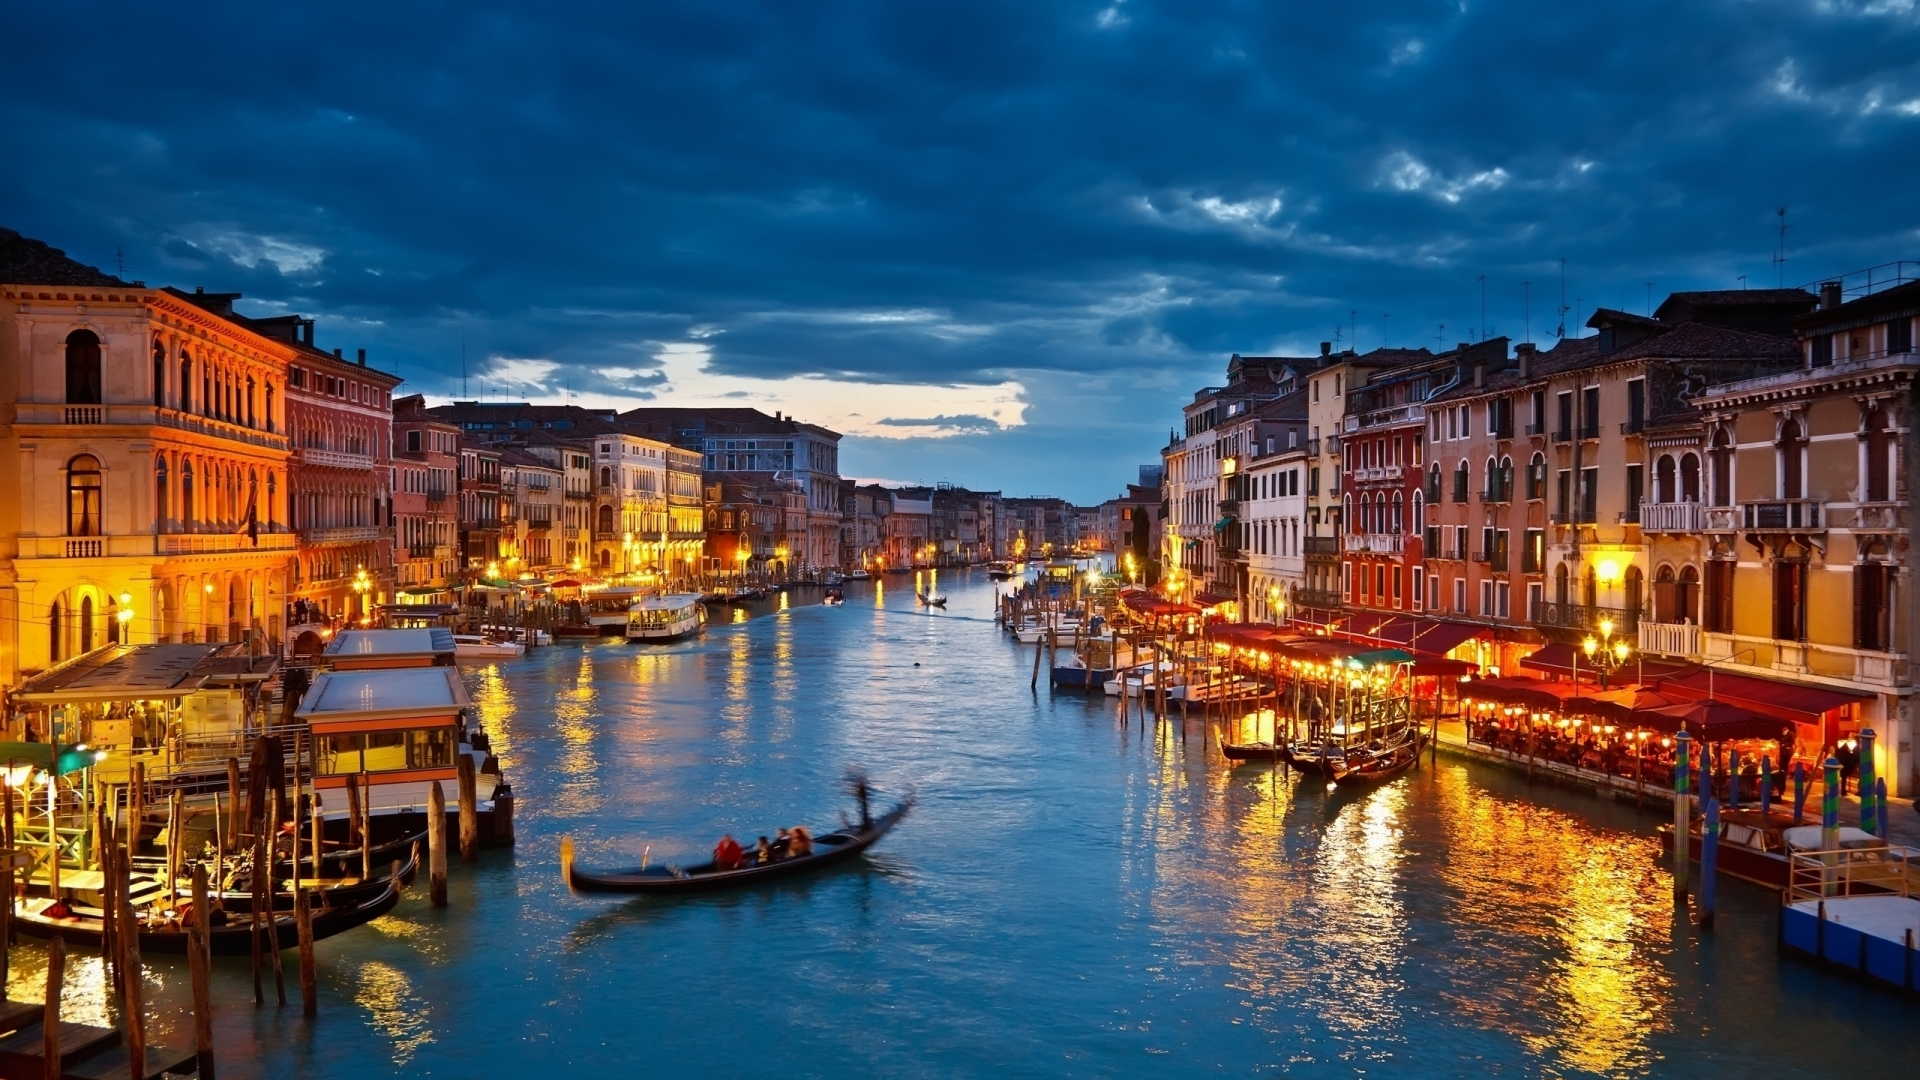 Night in Venice for 1920 x 1080 HDTV 1080p resolution